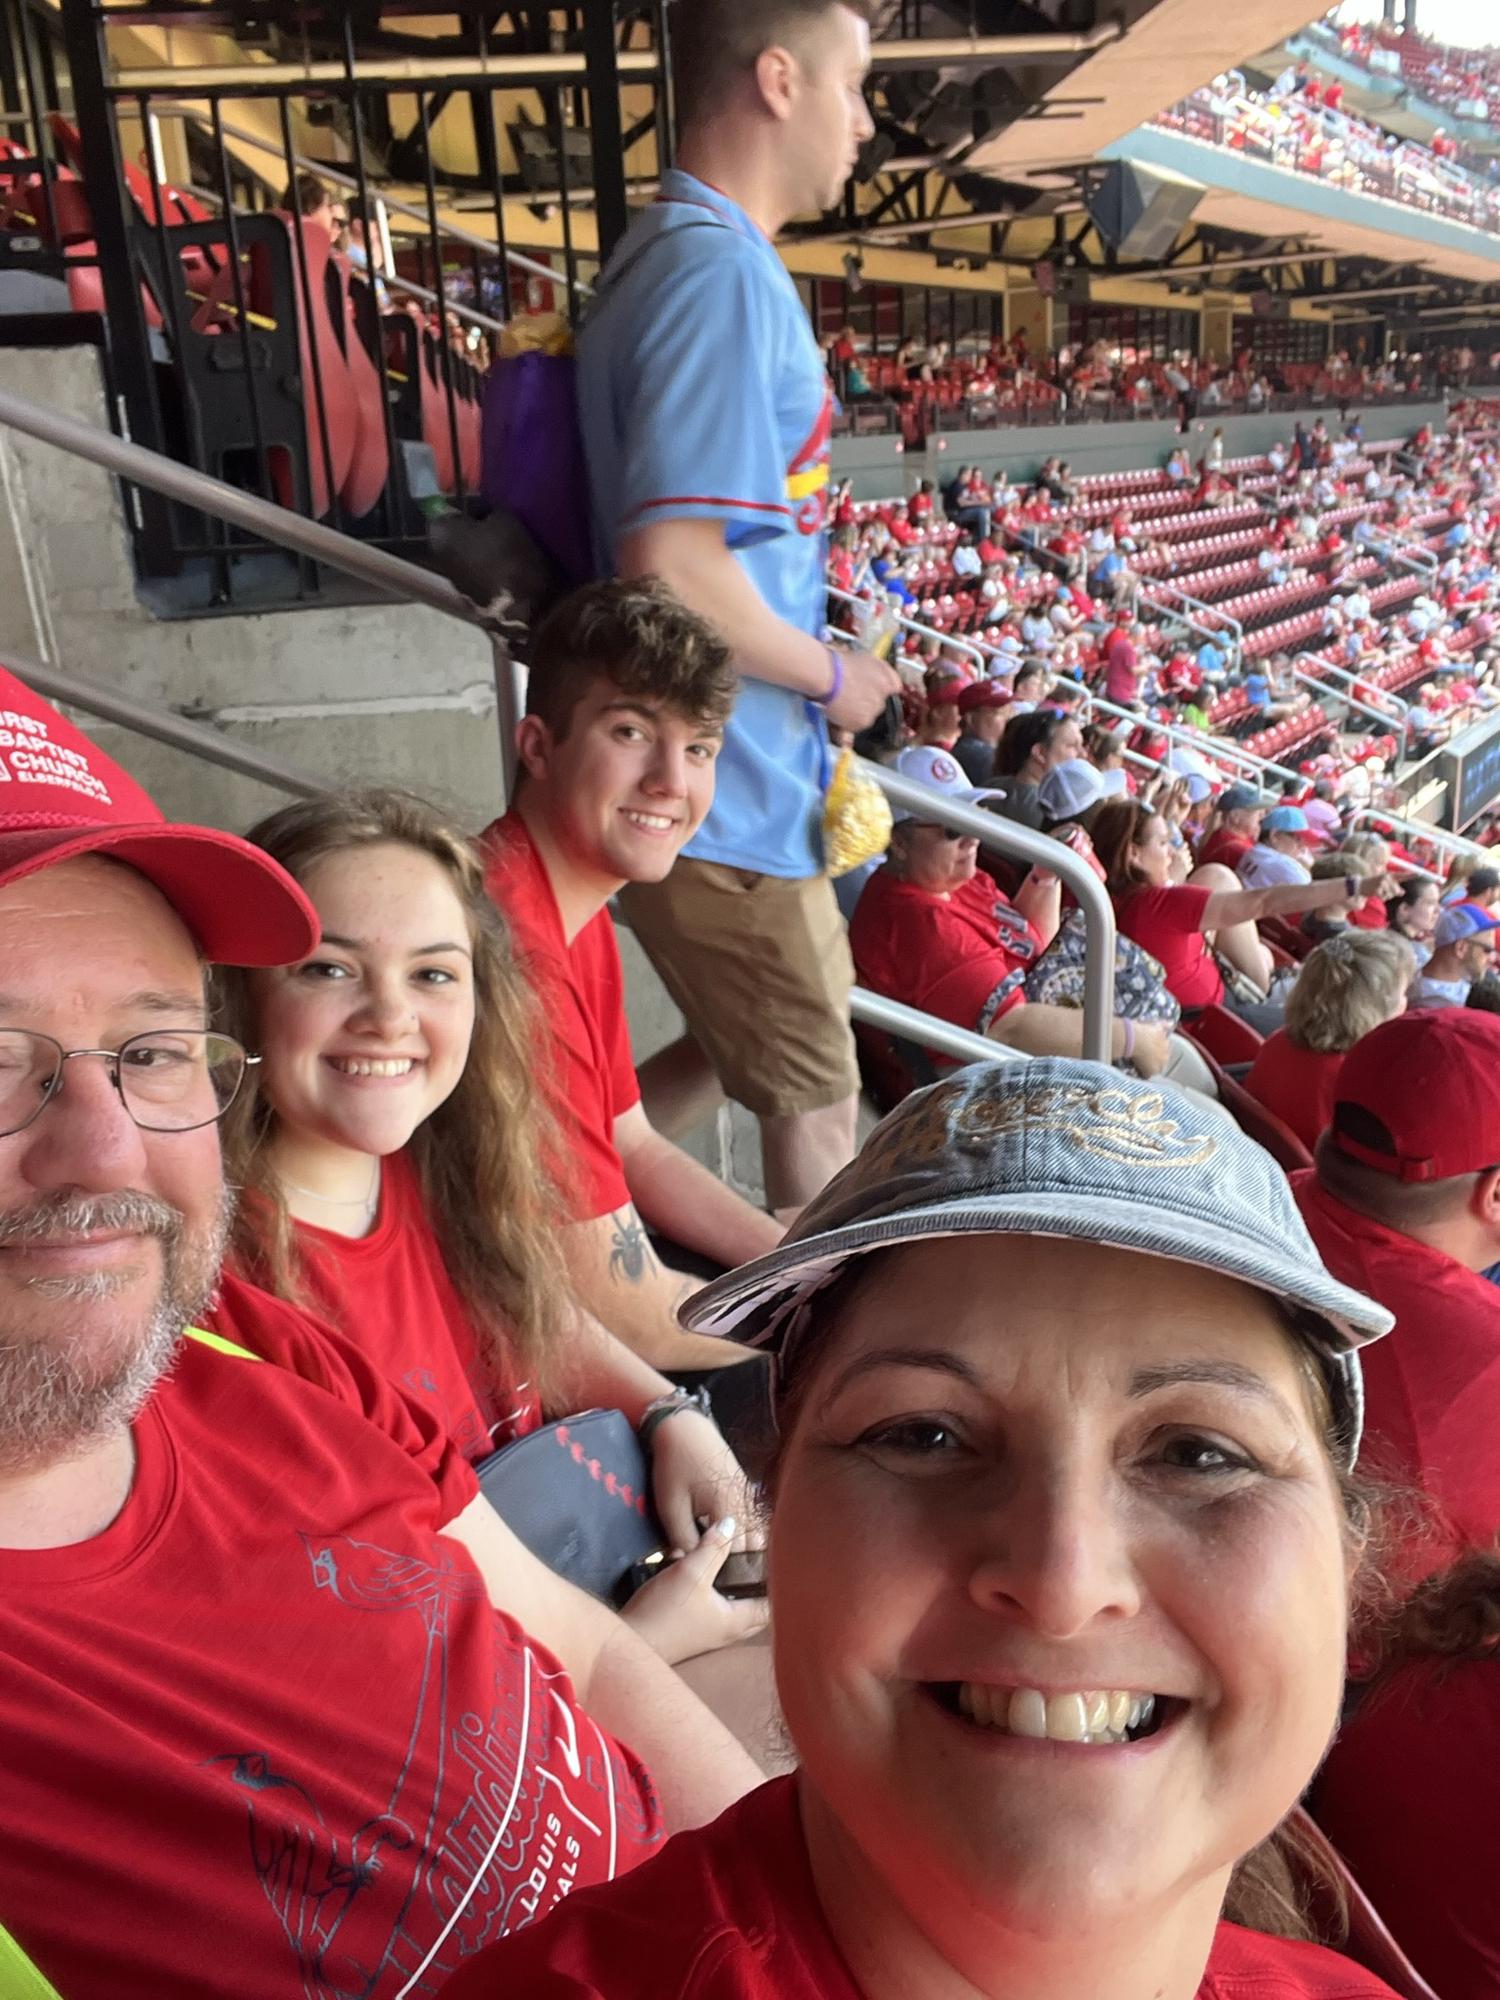 May 14th 2022
St. Louis. Cardinals game with Melanie’s parents